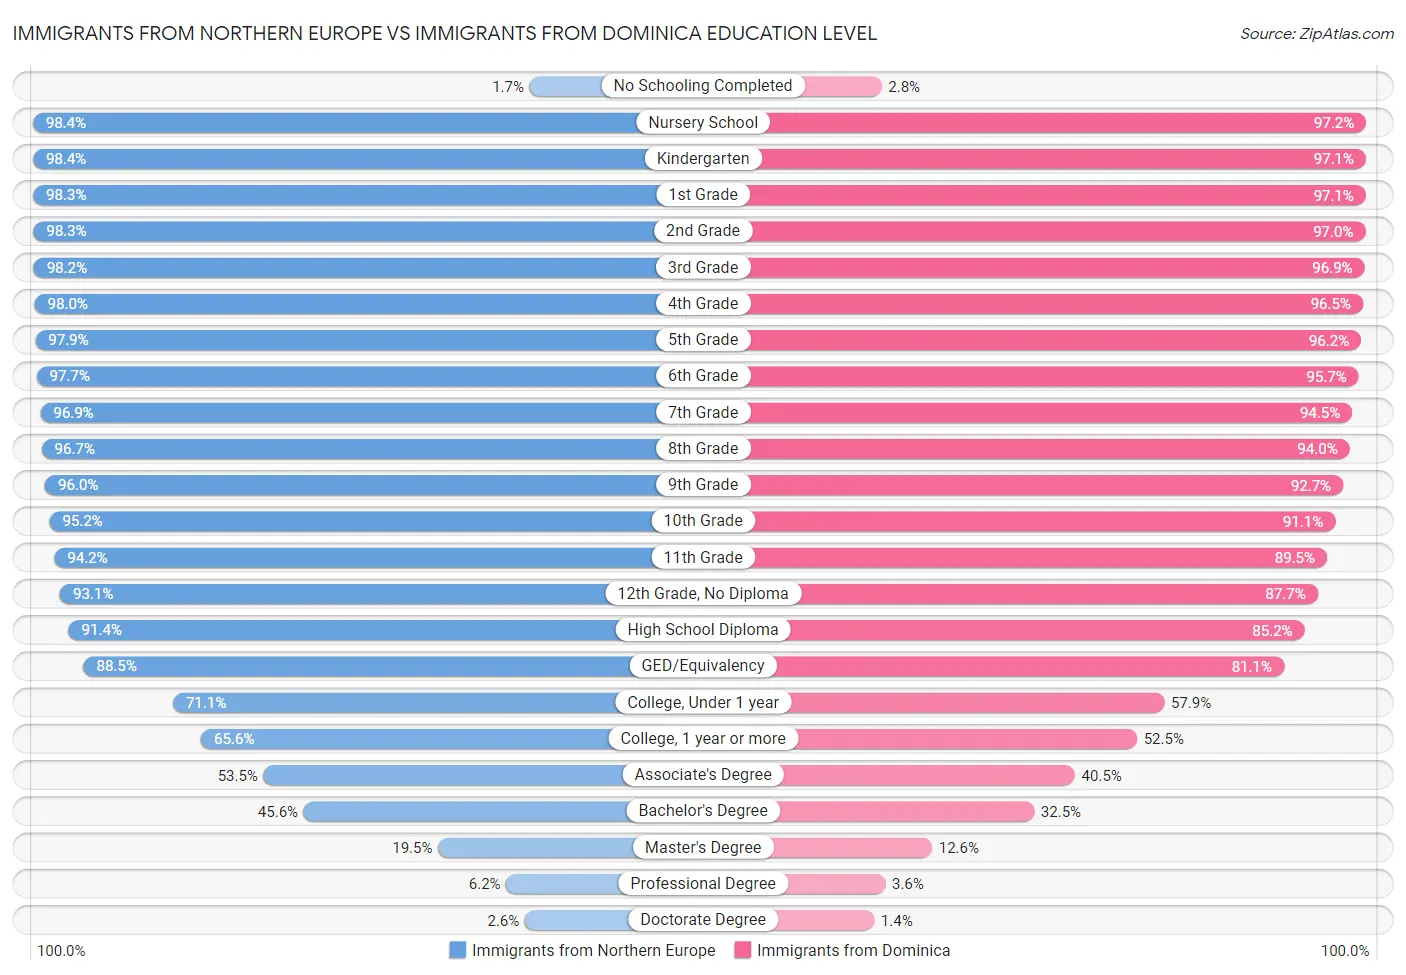 Immigrants from Northern Europe vs Immigrants from Dominica Education Level